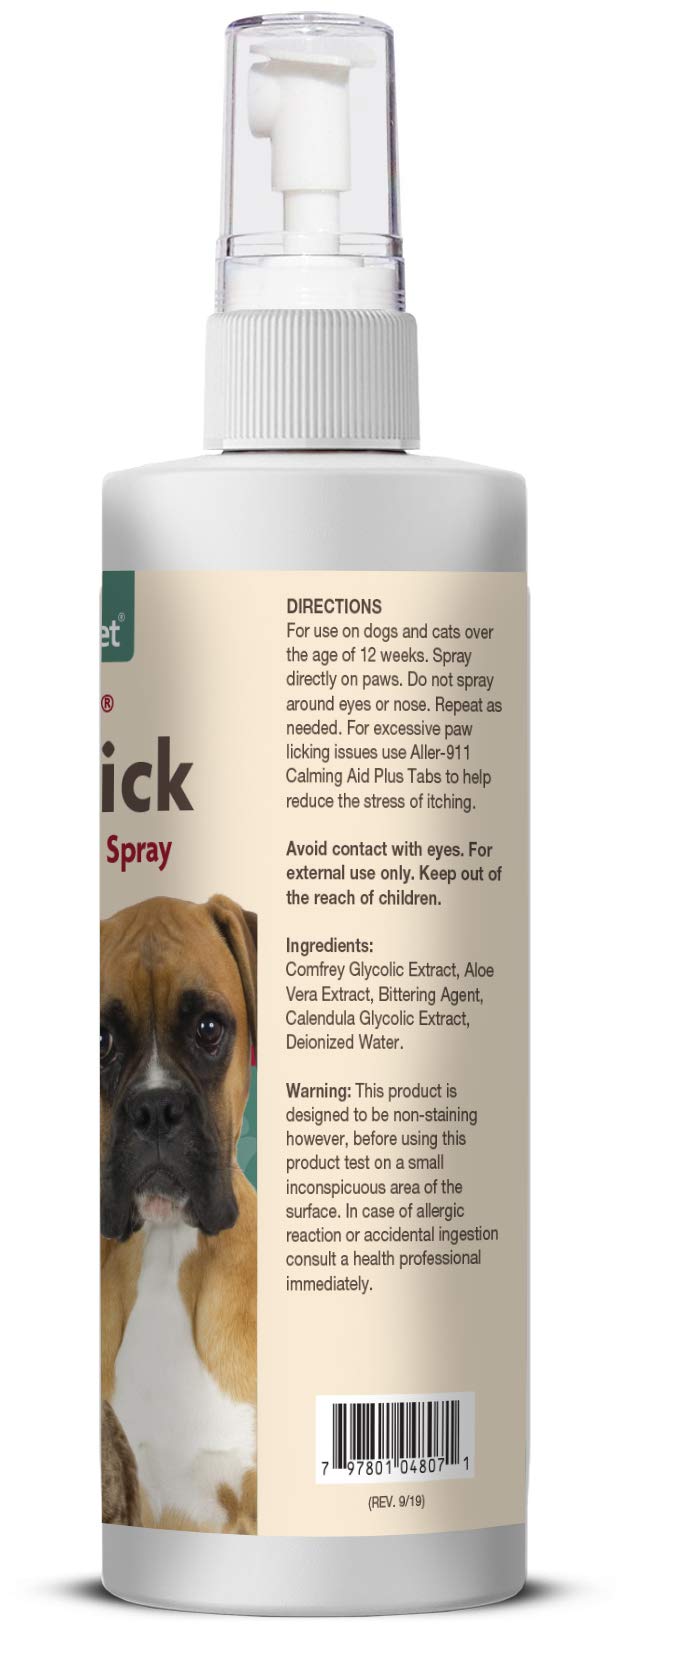 NaturVet – Aller-911 Anti-Lick Paw Spray Plus Aloe Vera – 8 oz – Helps to Soothe Itchy Paws – Enhanced with Ingredients to Discourage Further Licking – For Dogs & Cats - PawsPlanet Australia